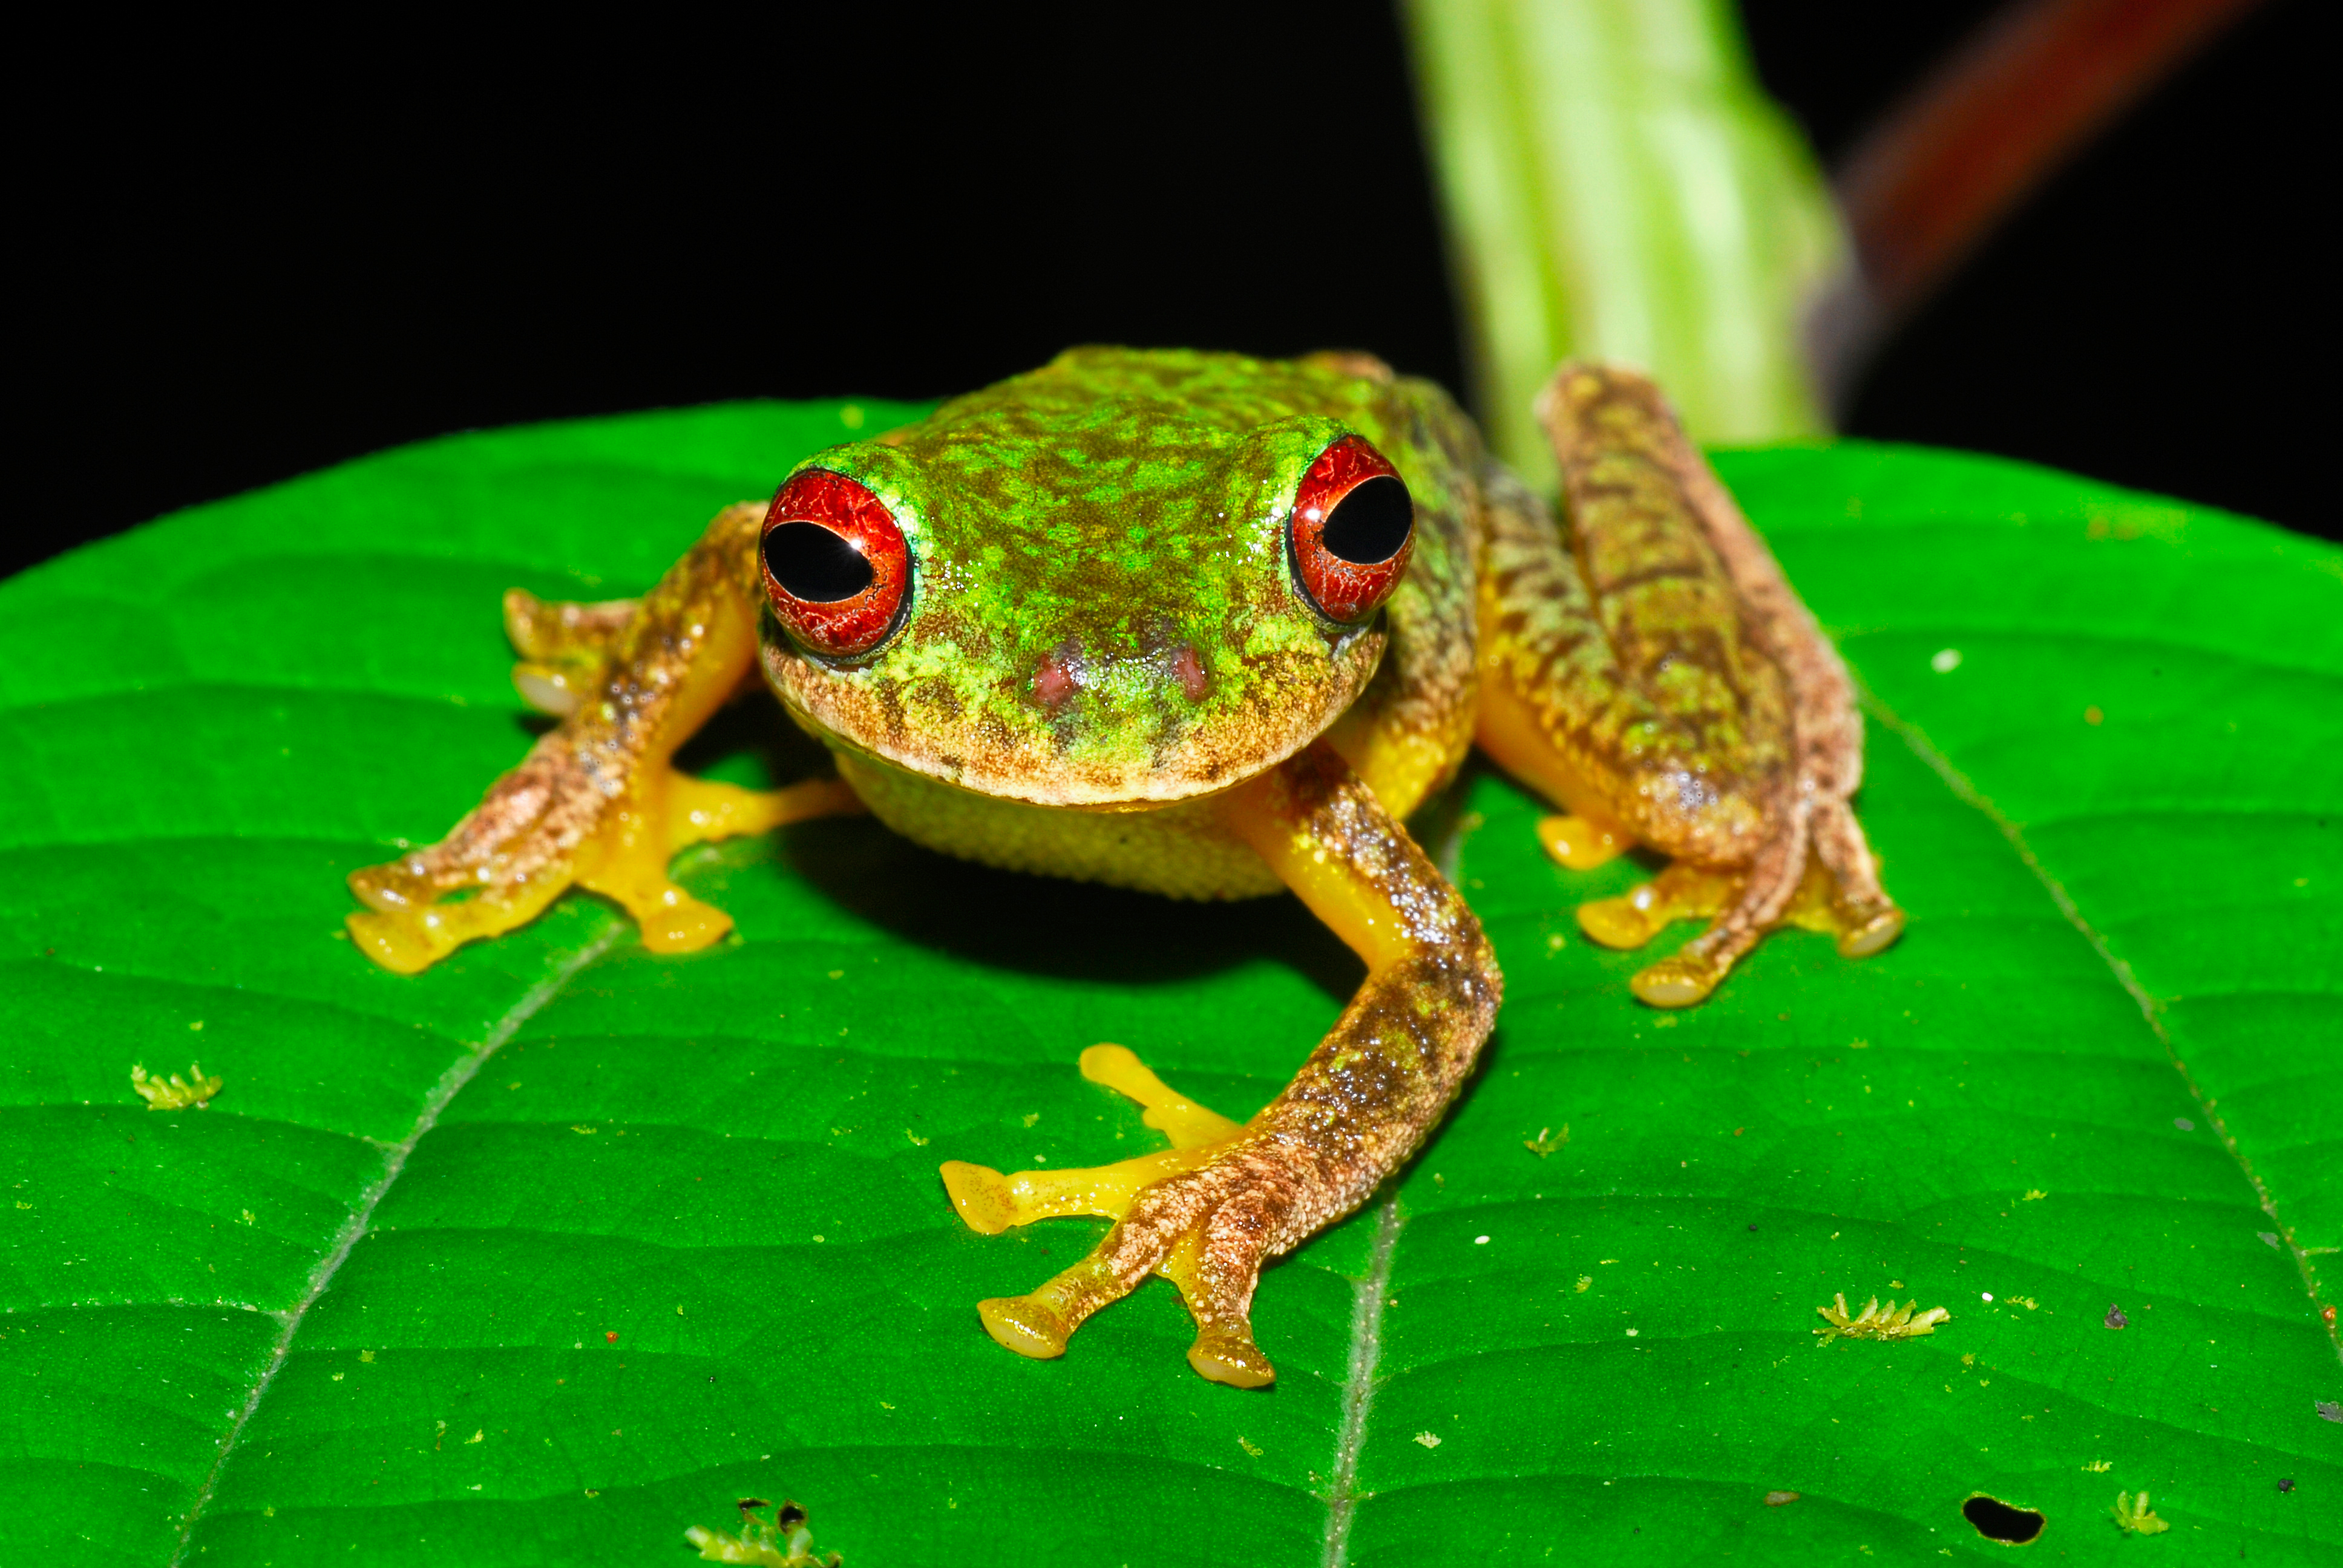 This Mossy Red-eyed Frog (Duellmanohyla soralia)